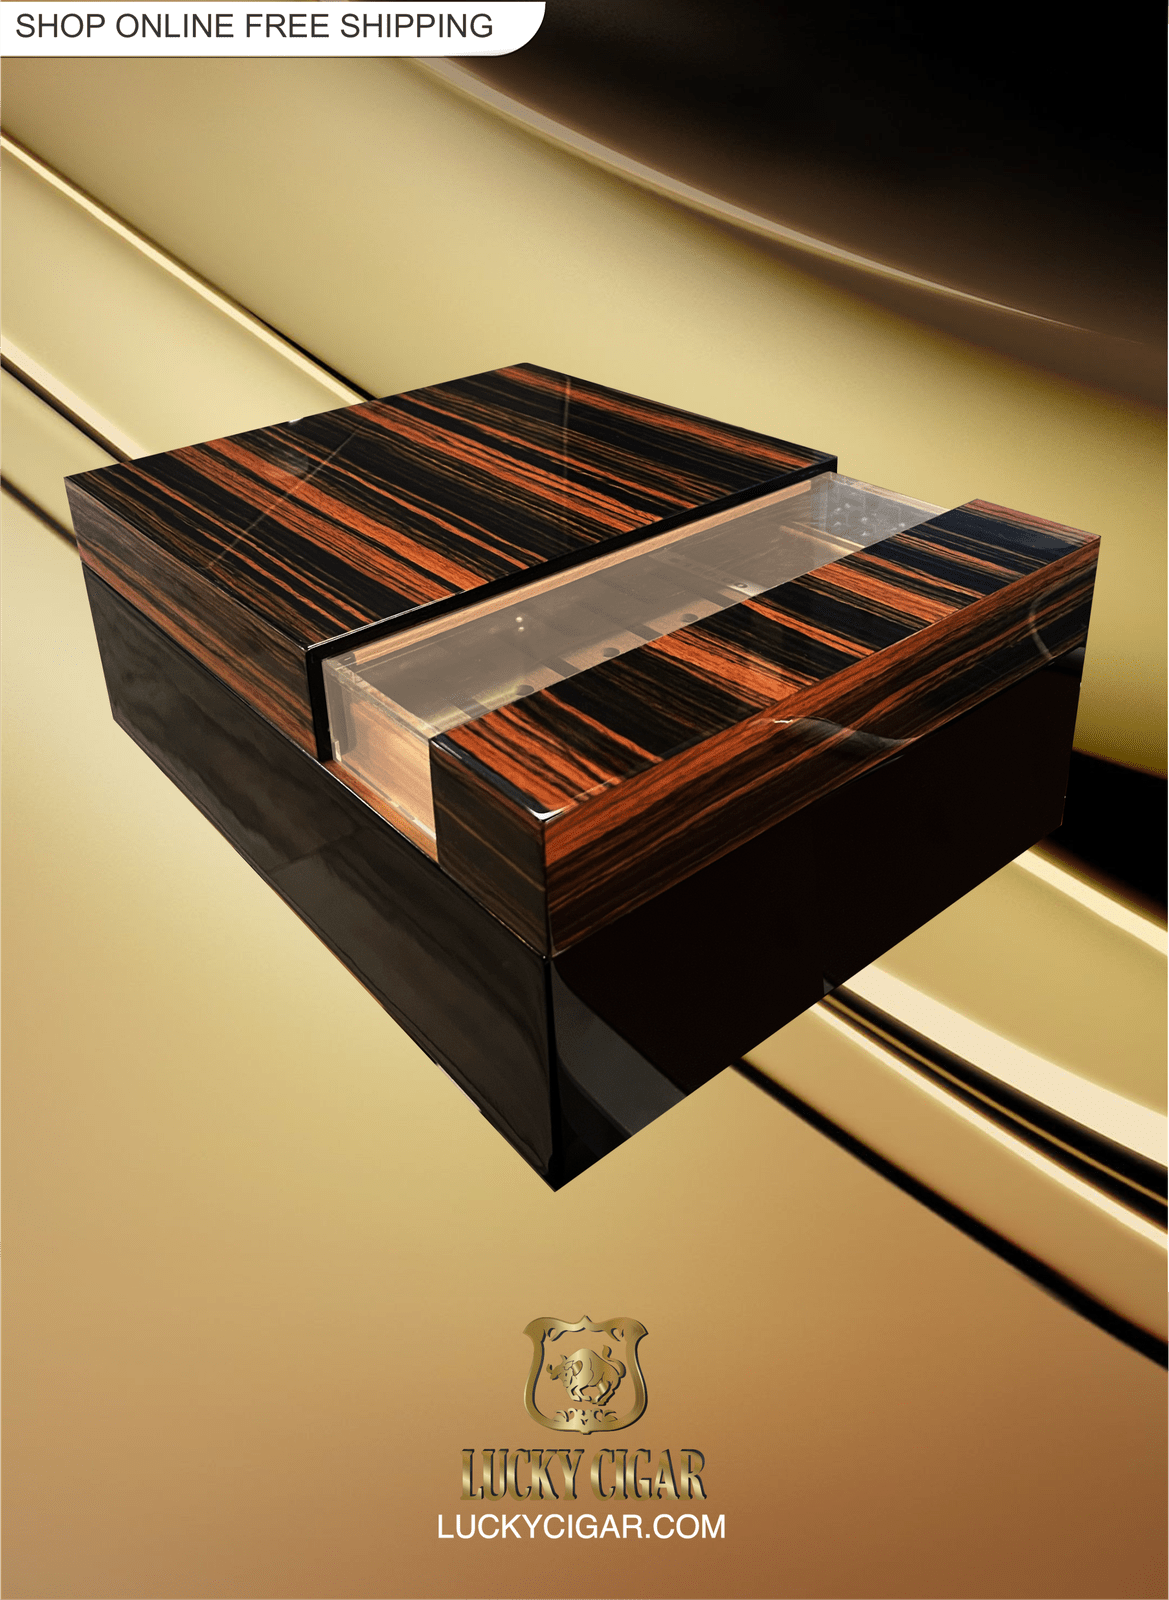 Cigar Lifestyle Accessories: Desk Humidor with Wood Grain, Window For 50 Cigars